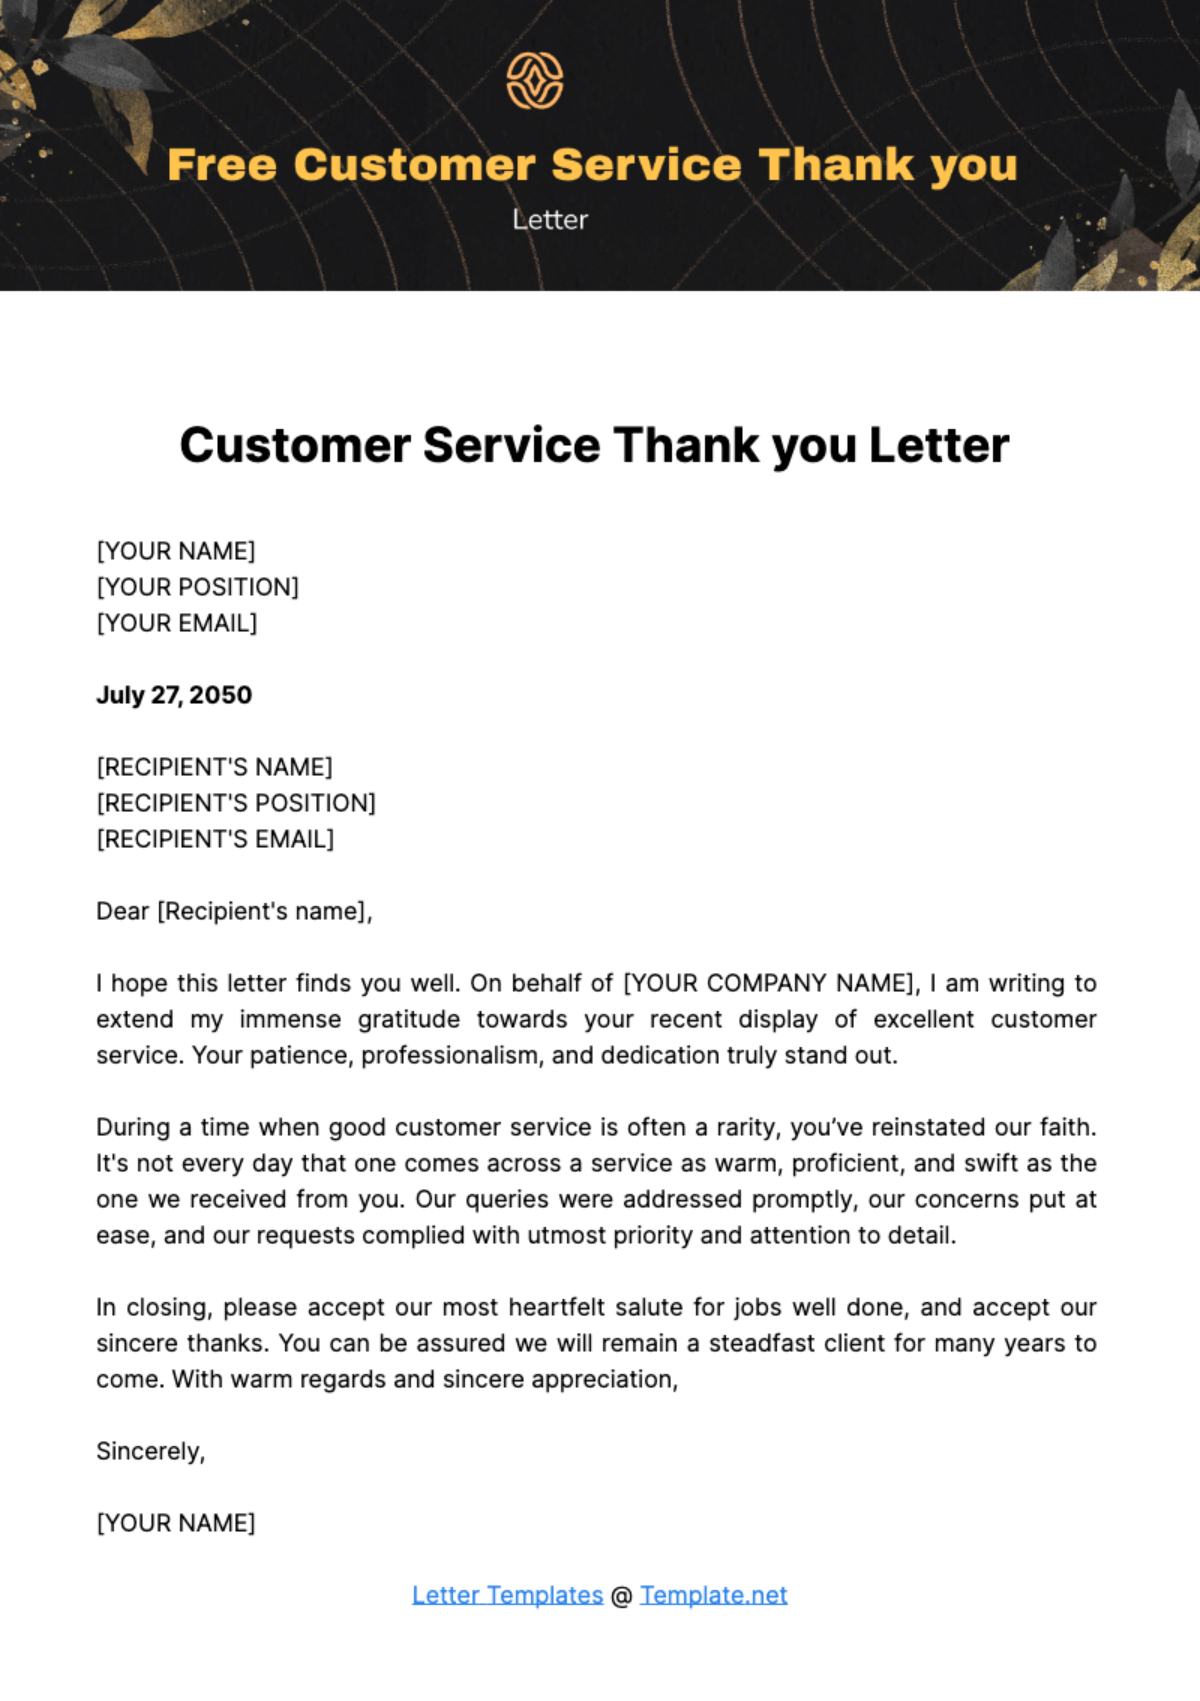 Customer Service Thank you Letter Template